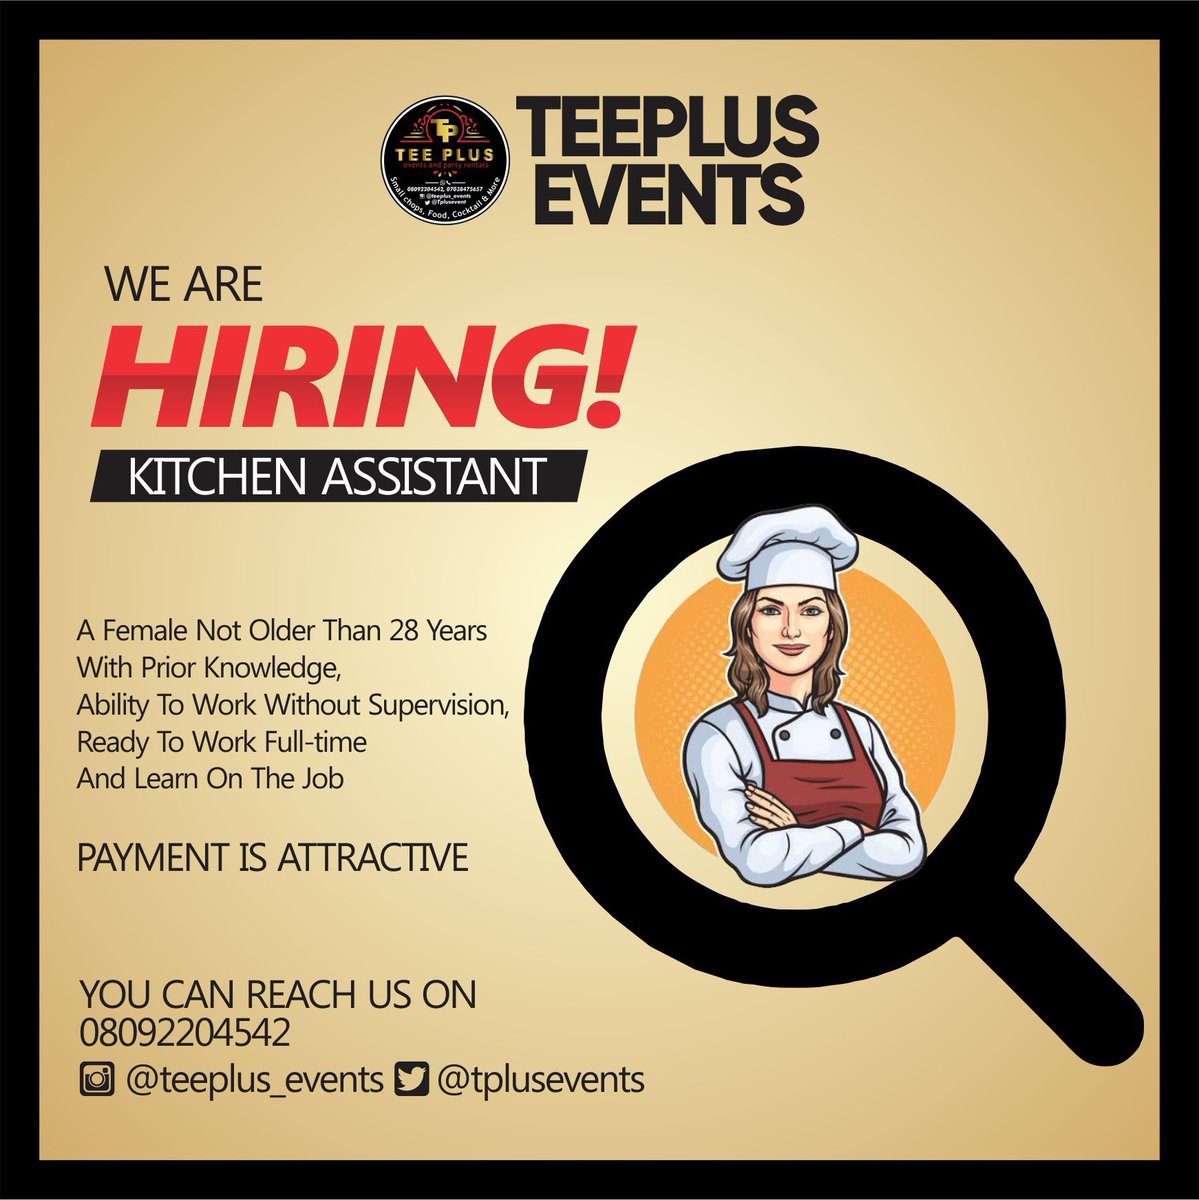 JOB VACANCY: @Tplusevent is currently hiring for the role of Kitchen Assistant. A female not older than 28 Years Old with prior knowledge of the job and ready to learn on the job. Ready to work full-time Payment is attractive and accommodation is available with T & Cs.